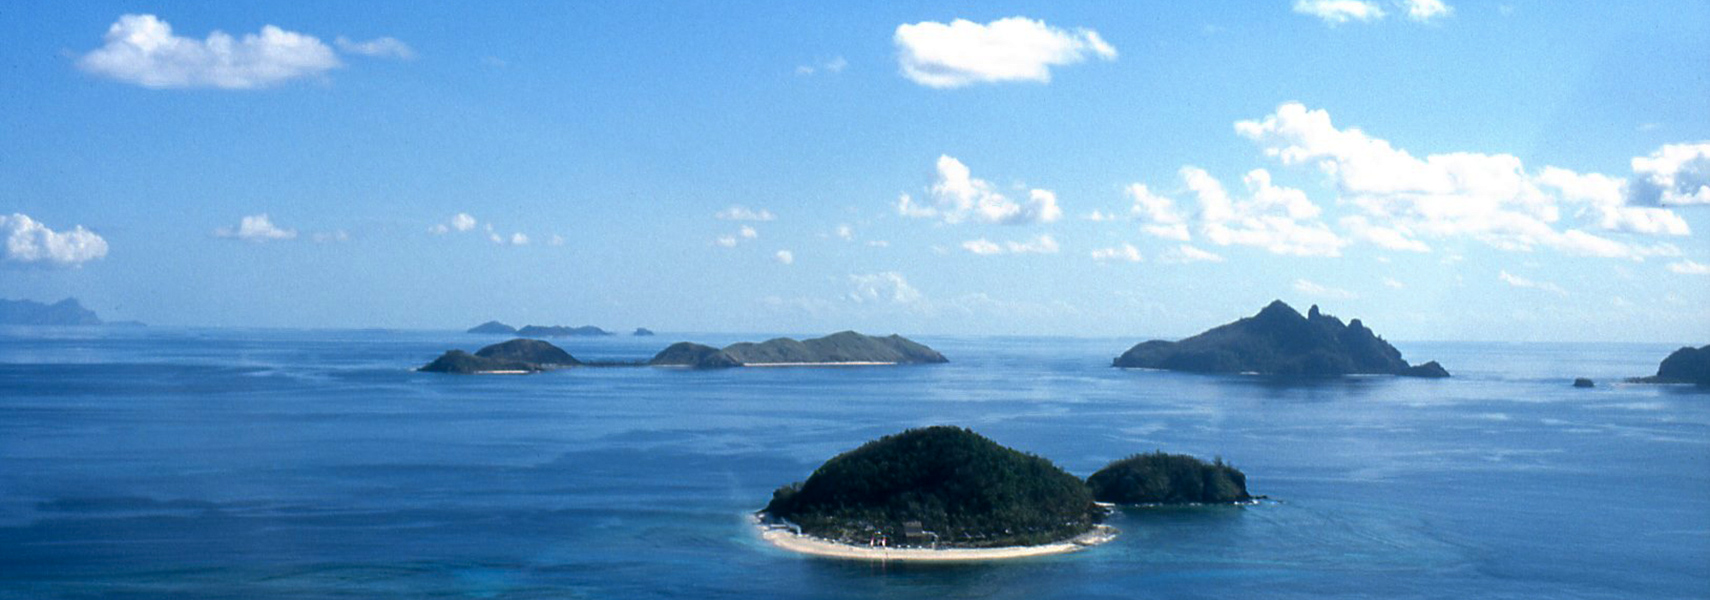 Aerial view of islands in the Mamanuca chain, Fiji